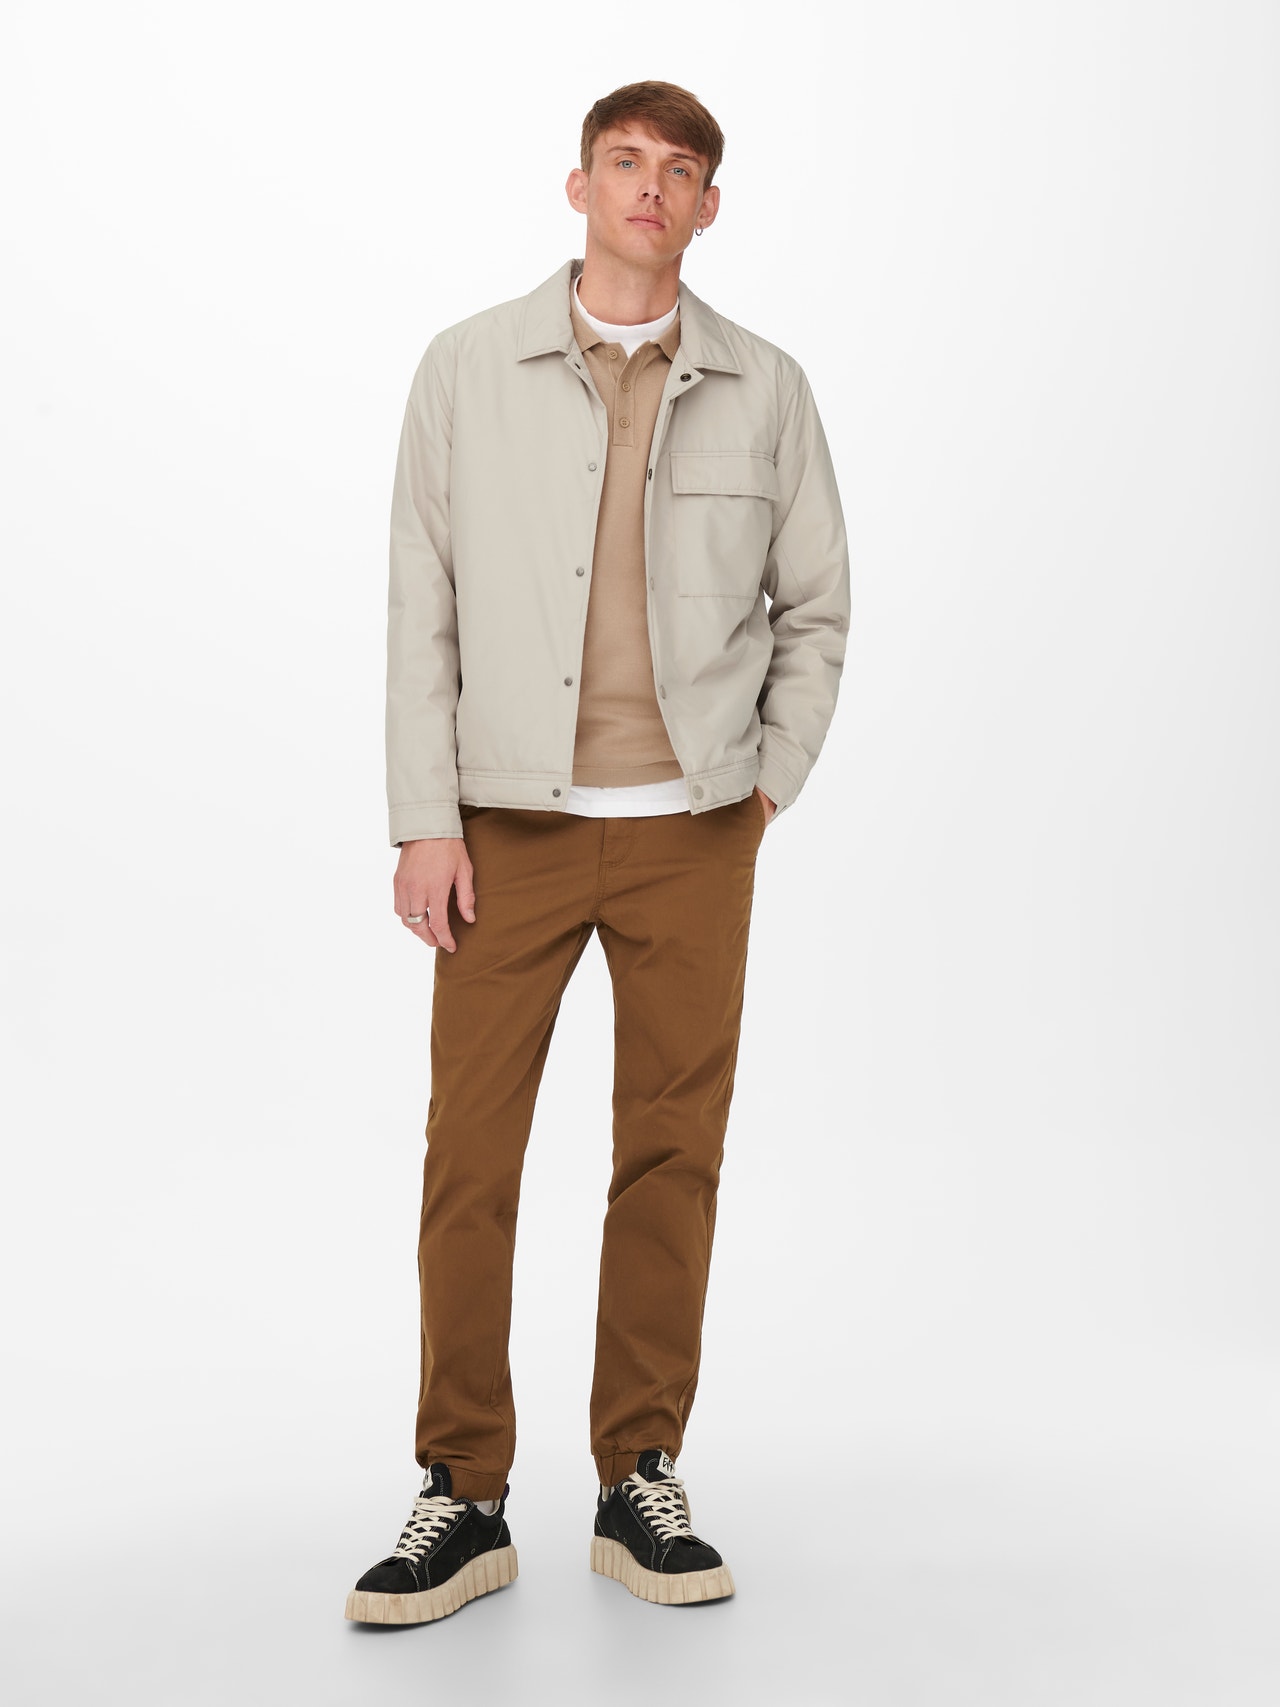 ONLY & SONS Jacket -Silver Lining - 22022462